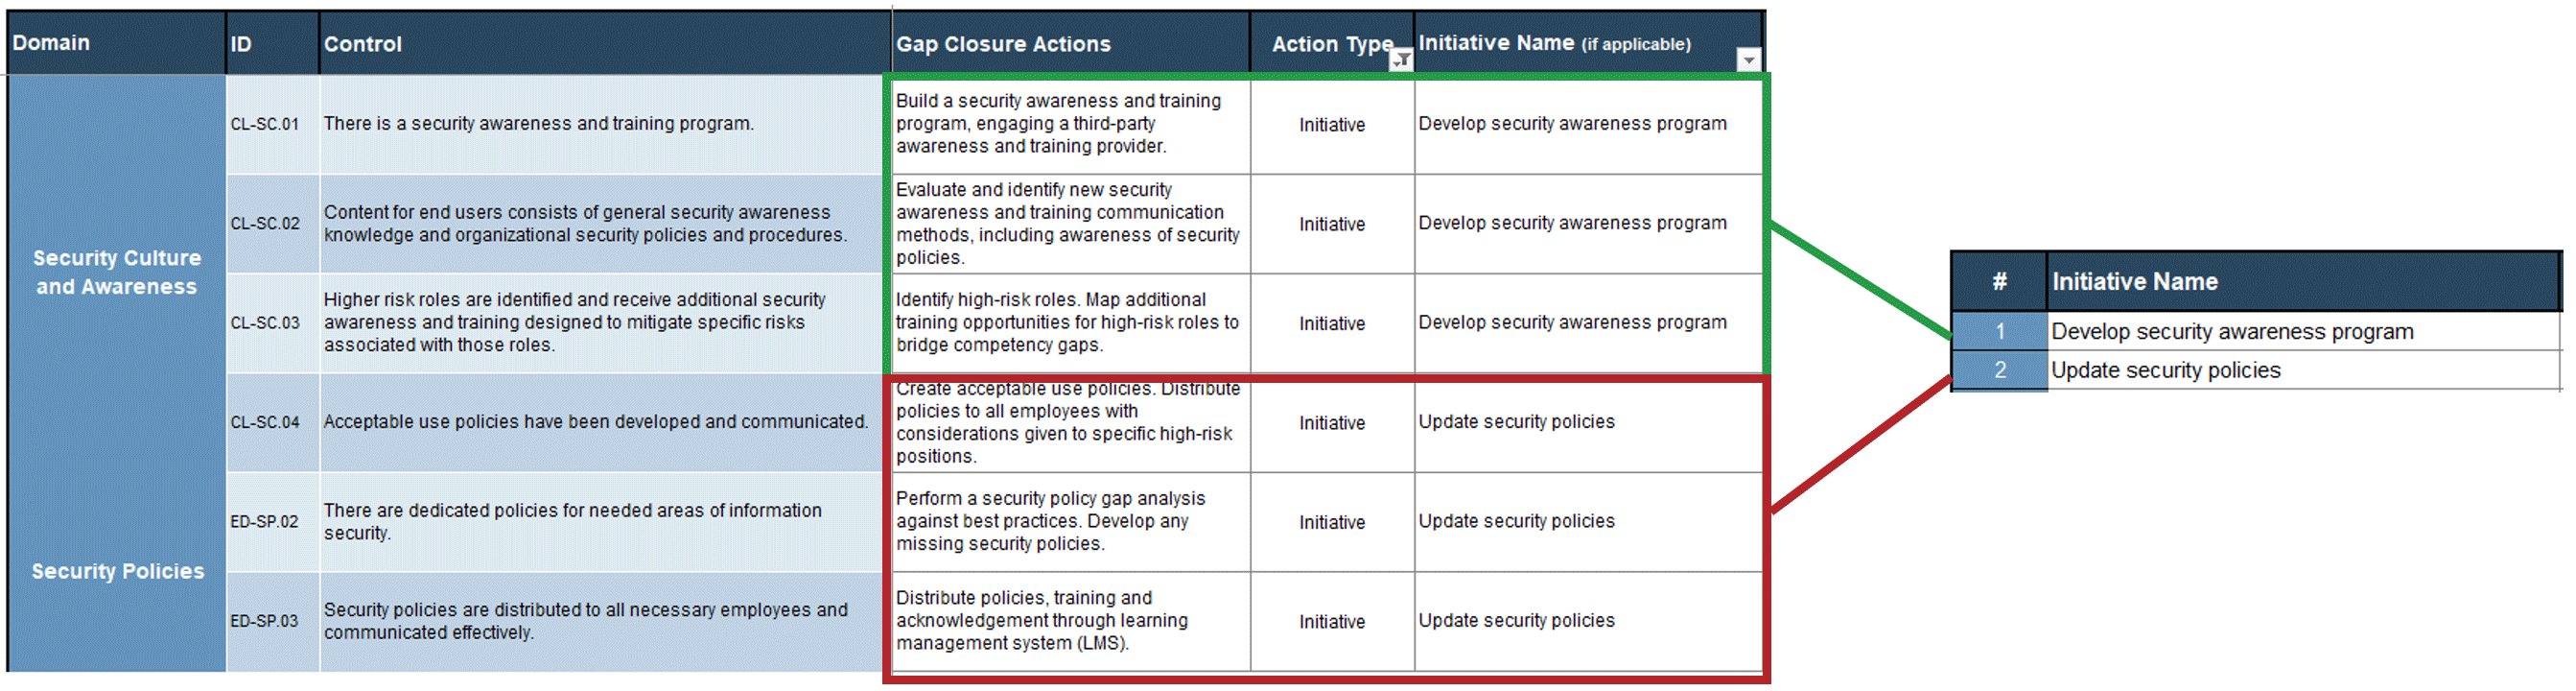 A screenshot showing how six sample gap closure actions can be distilled into two gap closure initiatives. Part of the 'Information Security Gap Analysis Tool.'